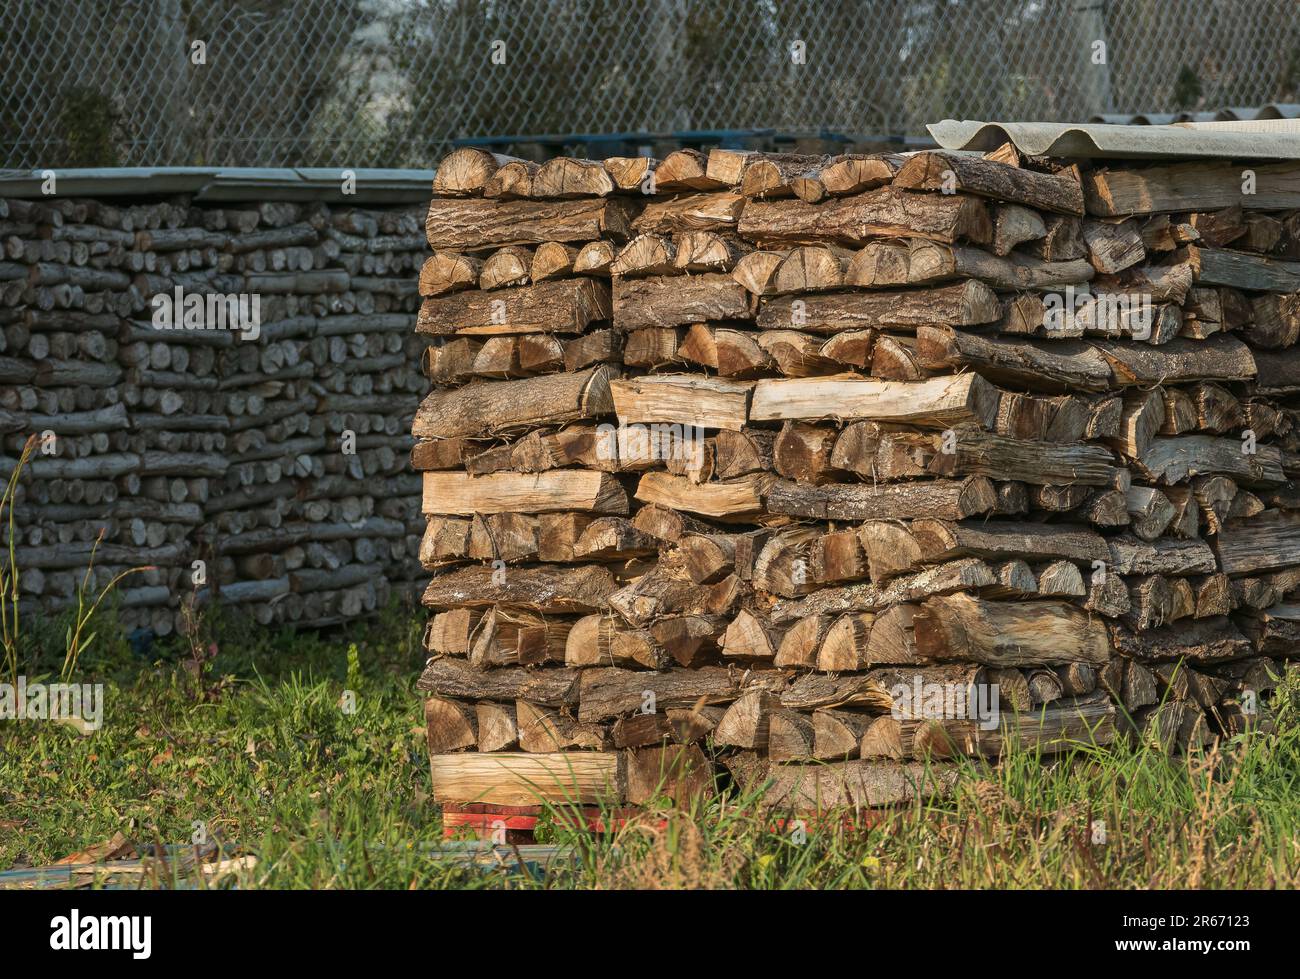 firewood stacked and covered ready to be burned in outdoor fireplace Stock Photo